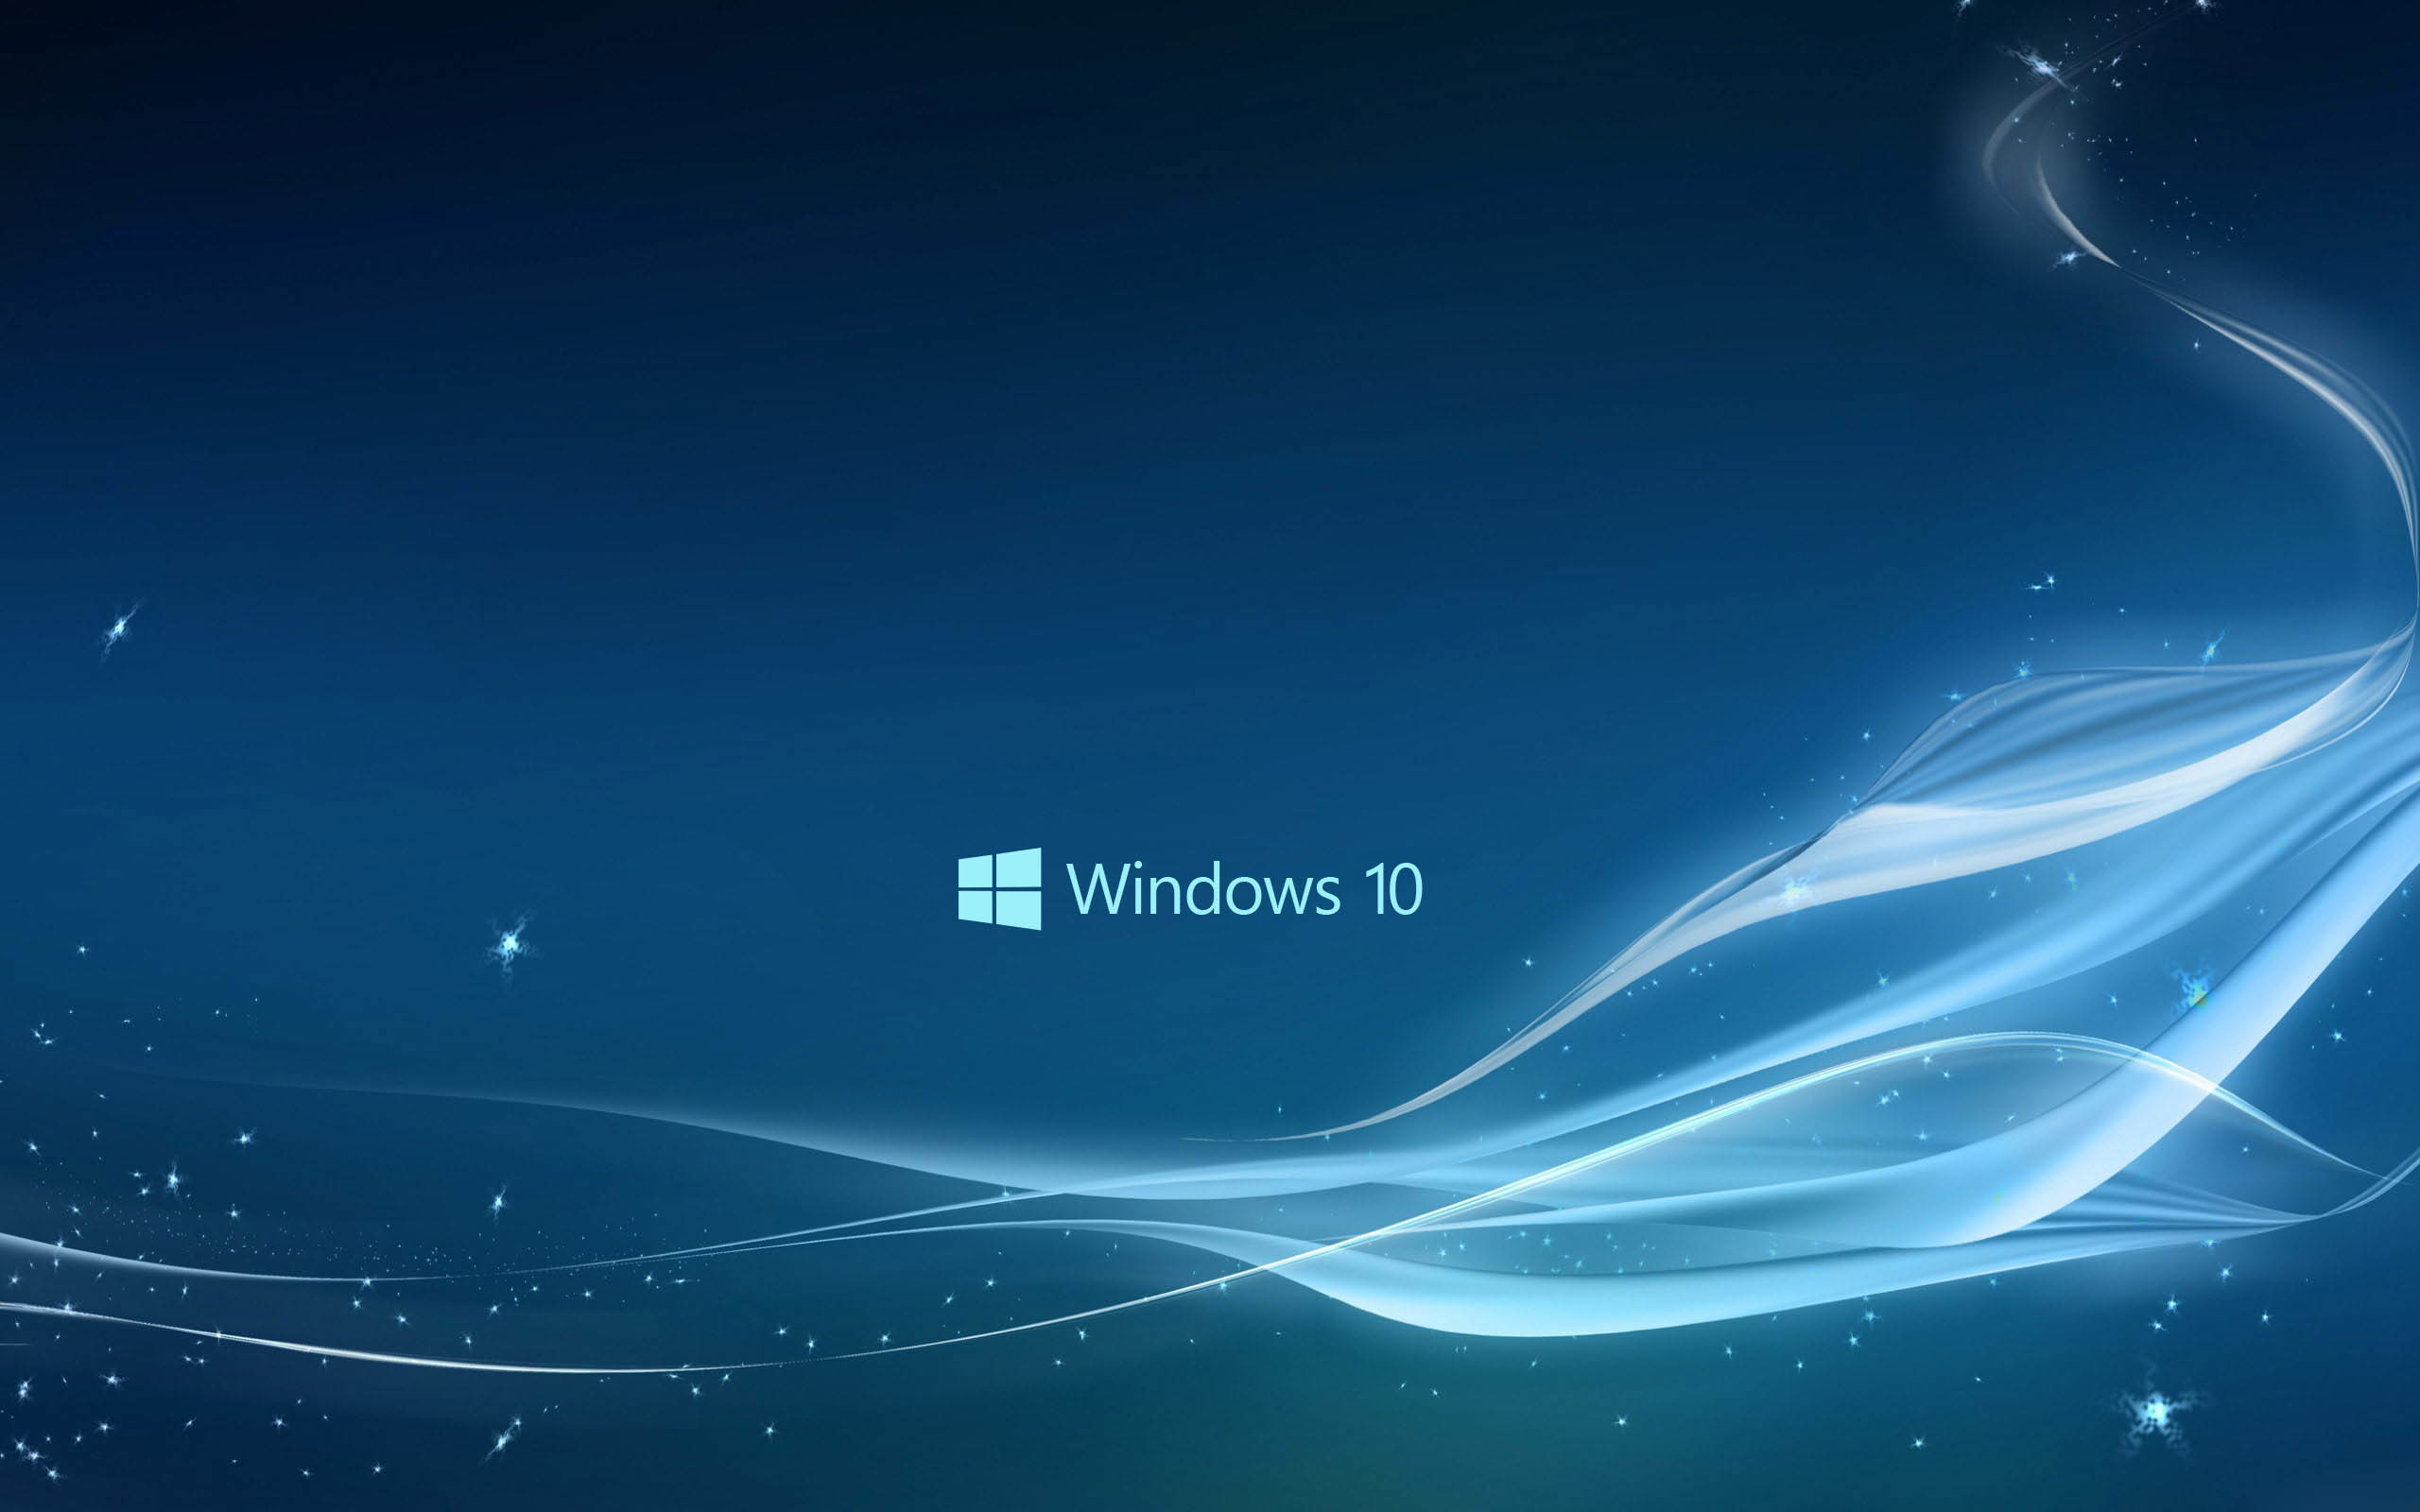 2560x1600 attachment file of Windows 10 wallpaper in abstract with blue stars and  waves